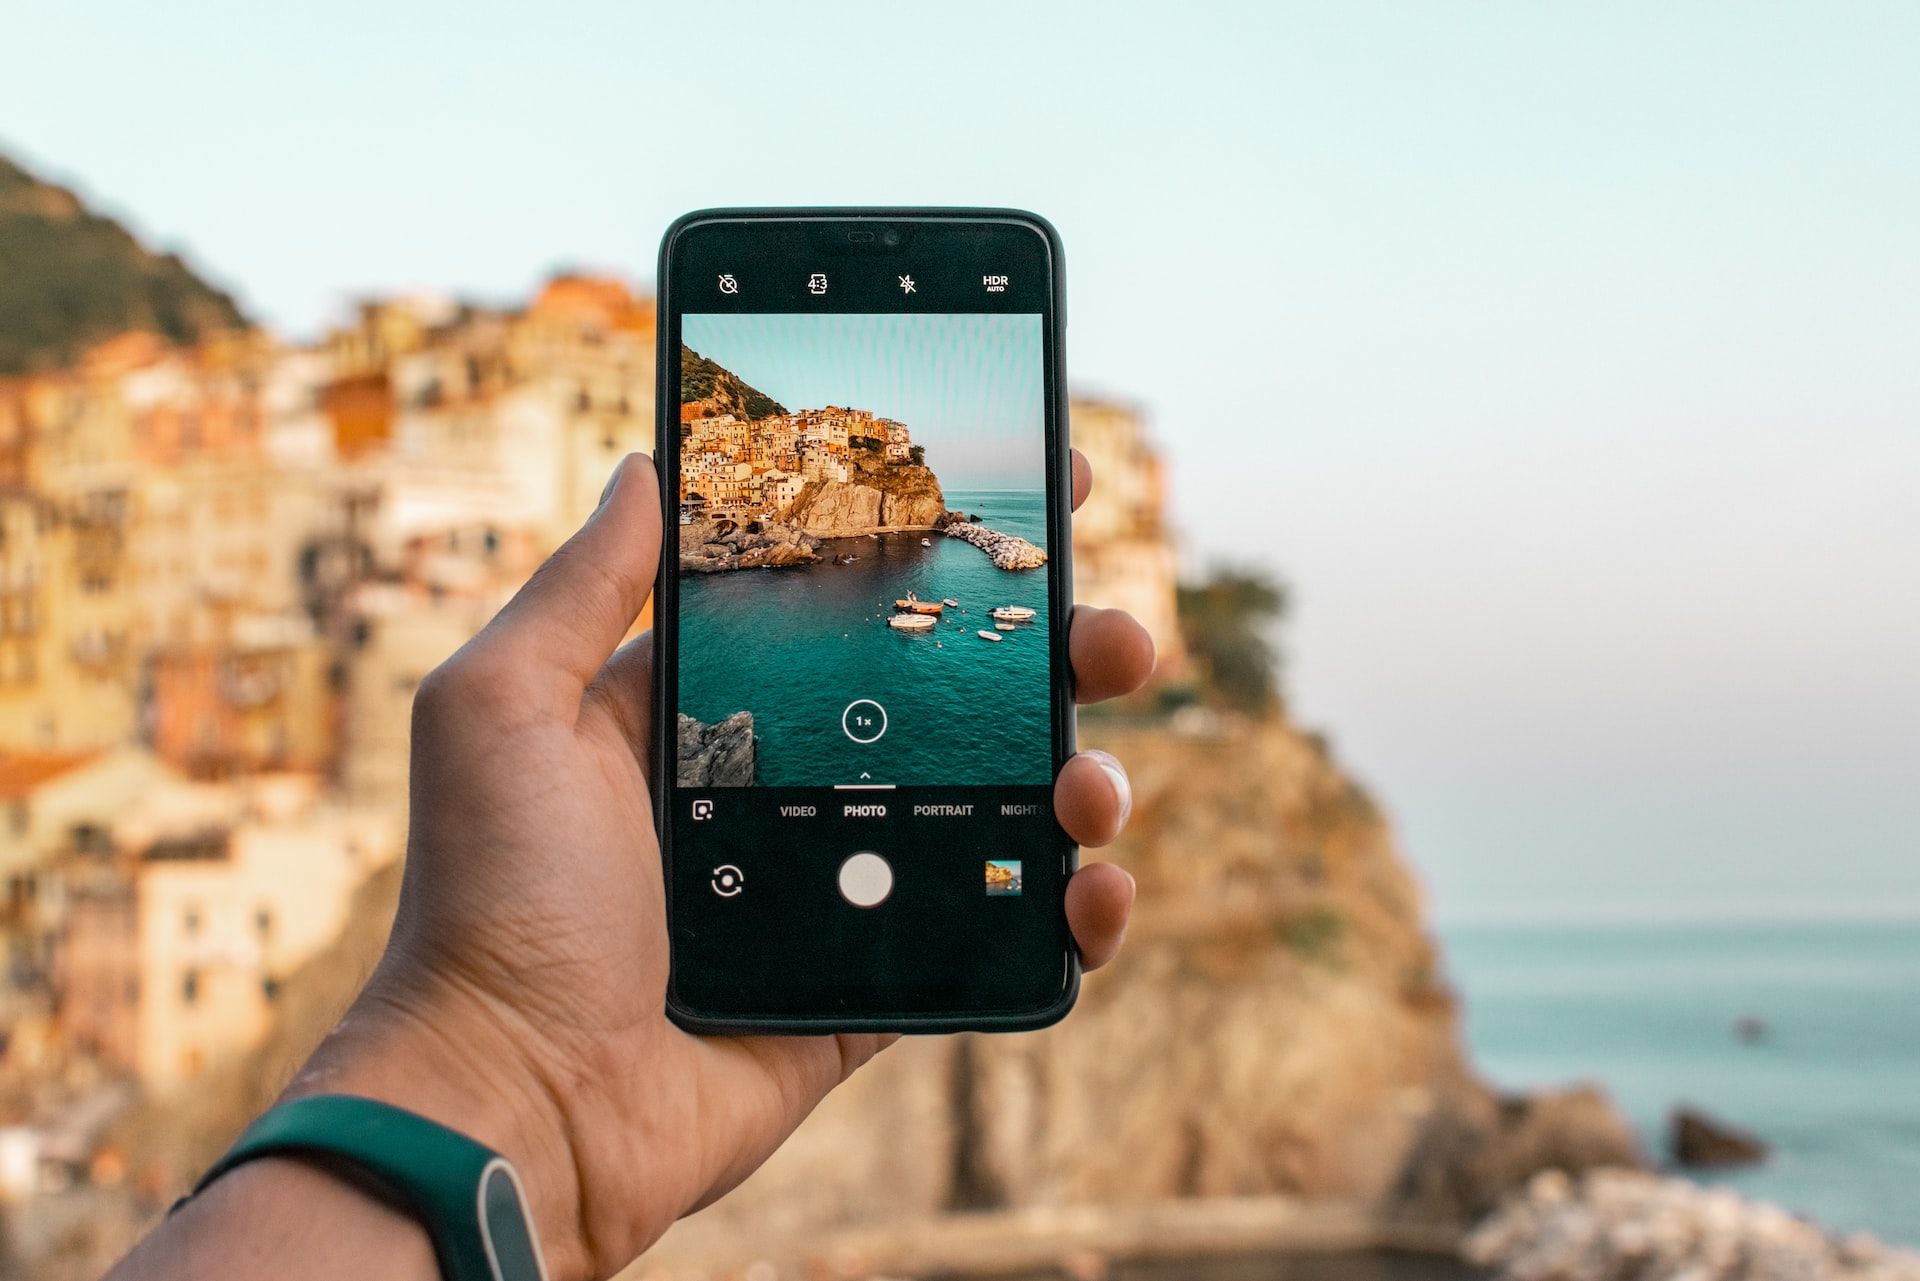 A hand holding an iPhone taking a portrait photo of a coastal village.